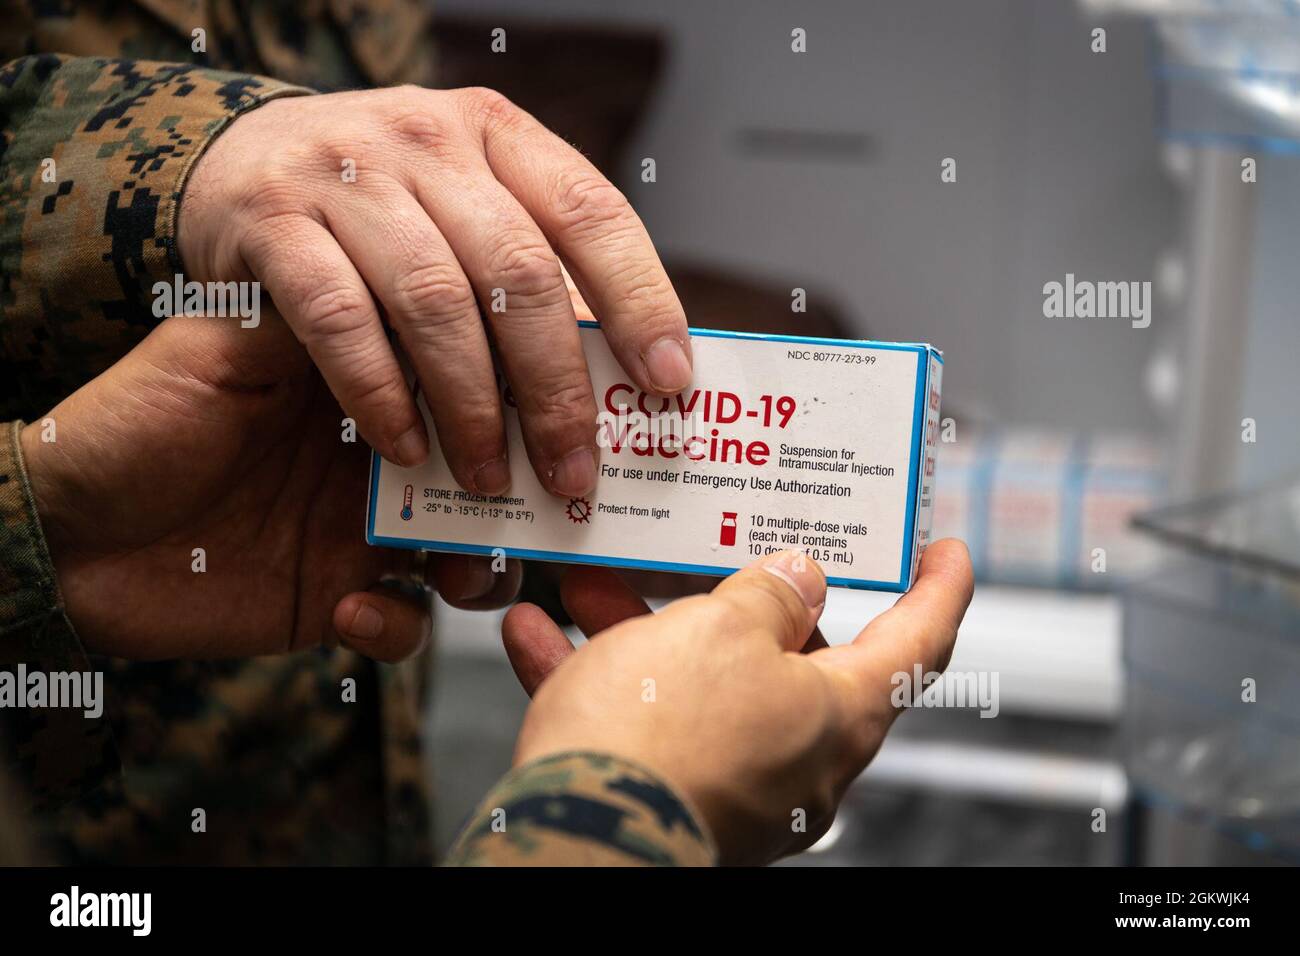 A U.S. Navy Hospital Corpsman with Marine Rotational Force - Darwin holds a COVID-19 vaccine at Robertson Barracks, Darwin, NT, Australia, July 10, 2021. The vaccines arrived at Royal Australian Air Force Base Darwin and were distributed to Larrakeyah and Robertson Barracks medical facilities to vaccinate U.S. service members in Australia’s Top End. The Marines and Sailors of MRF-D 21.2 have successfully observed all COVID-19 mitigation procedures required by the Australian and U.S. governments to travel to the Northern Territory and now fall under protocols set by the local government. Stock Photo